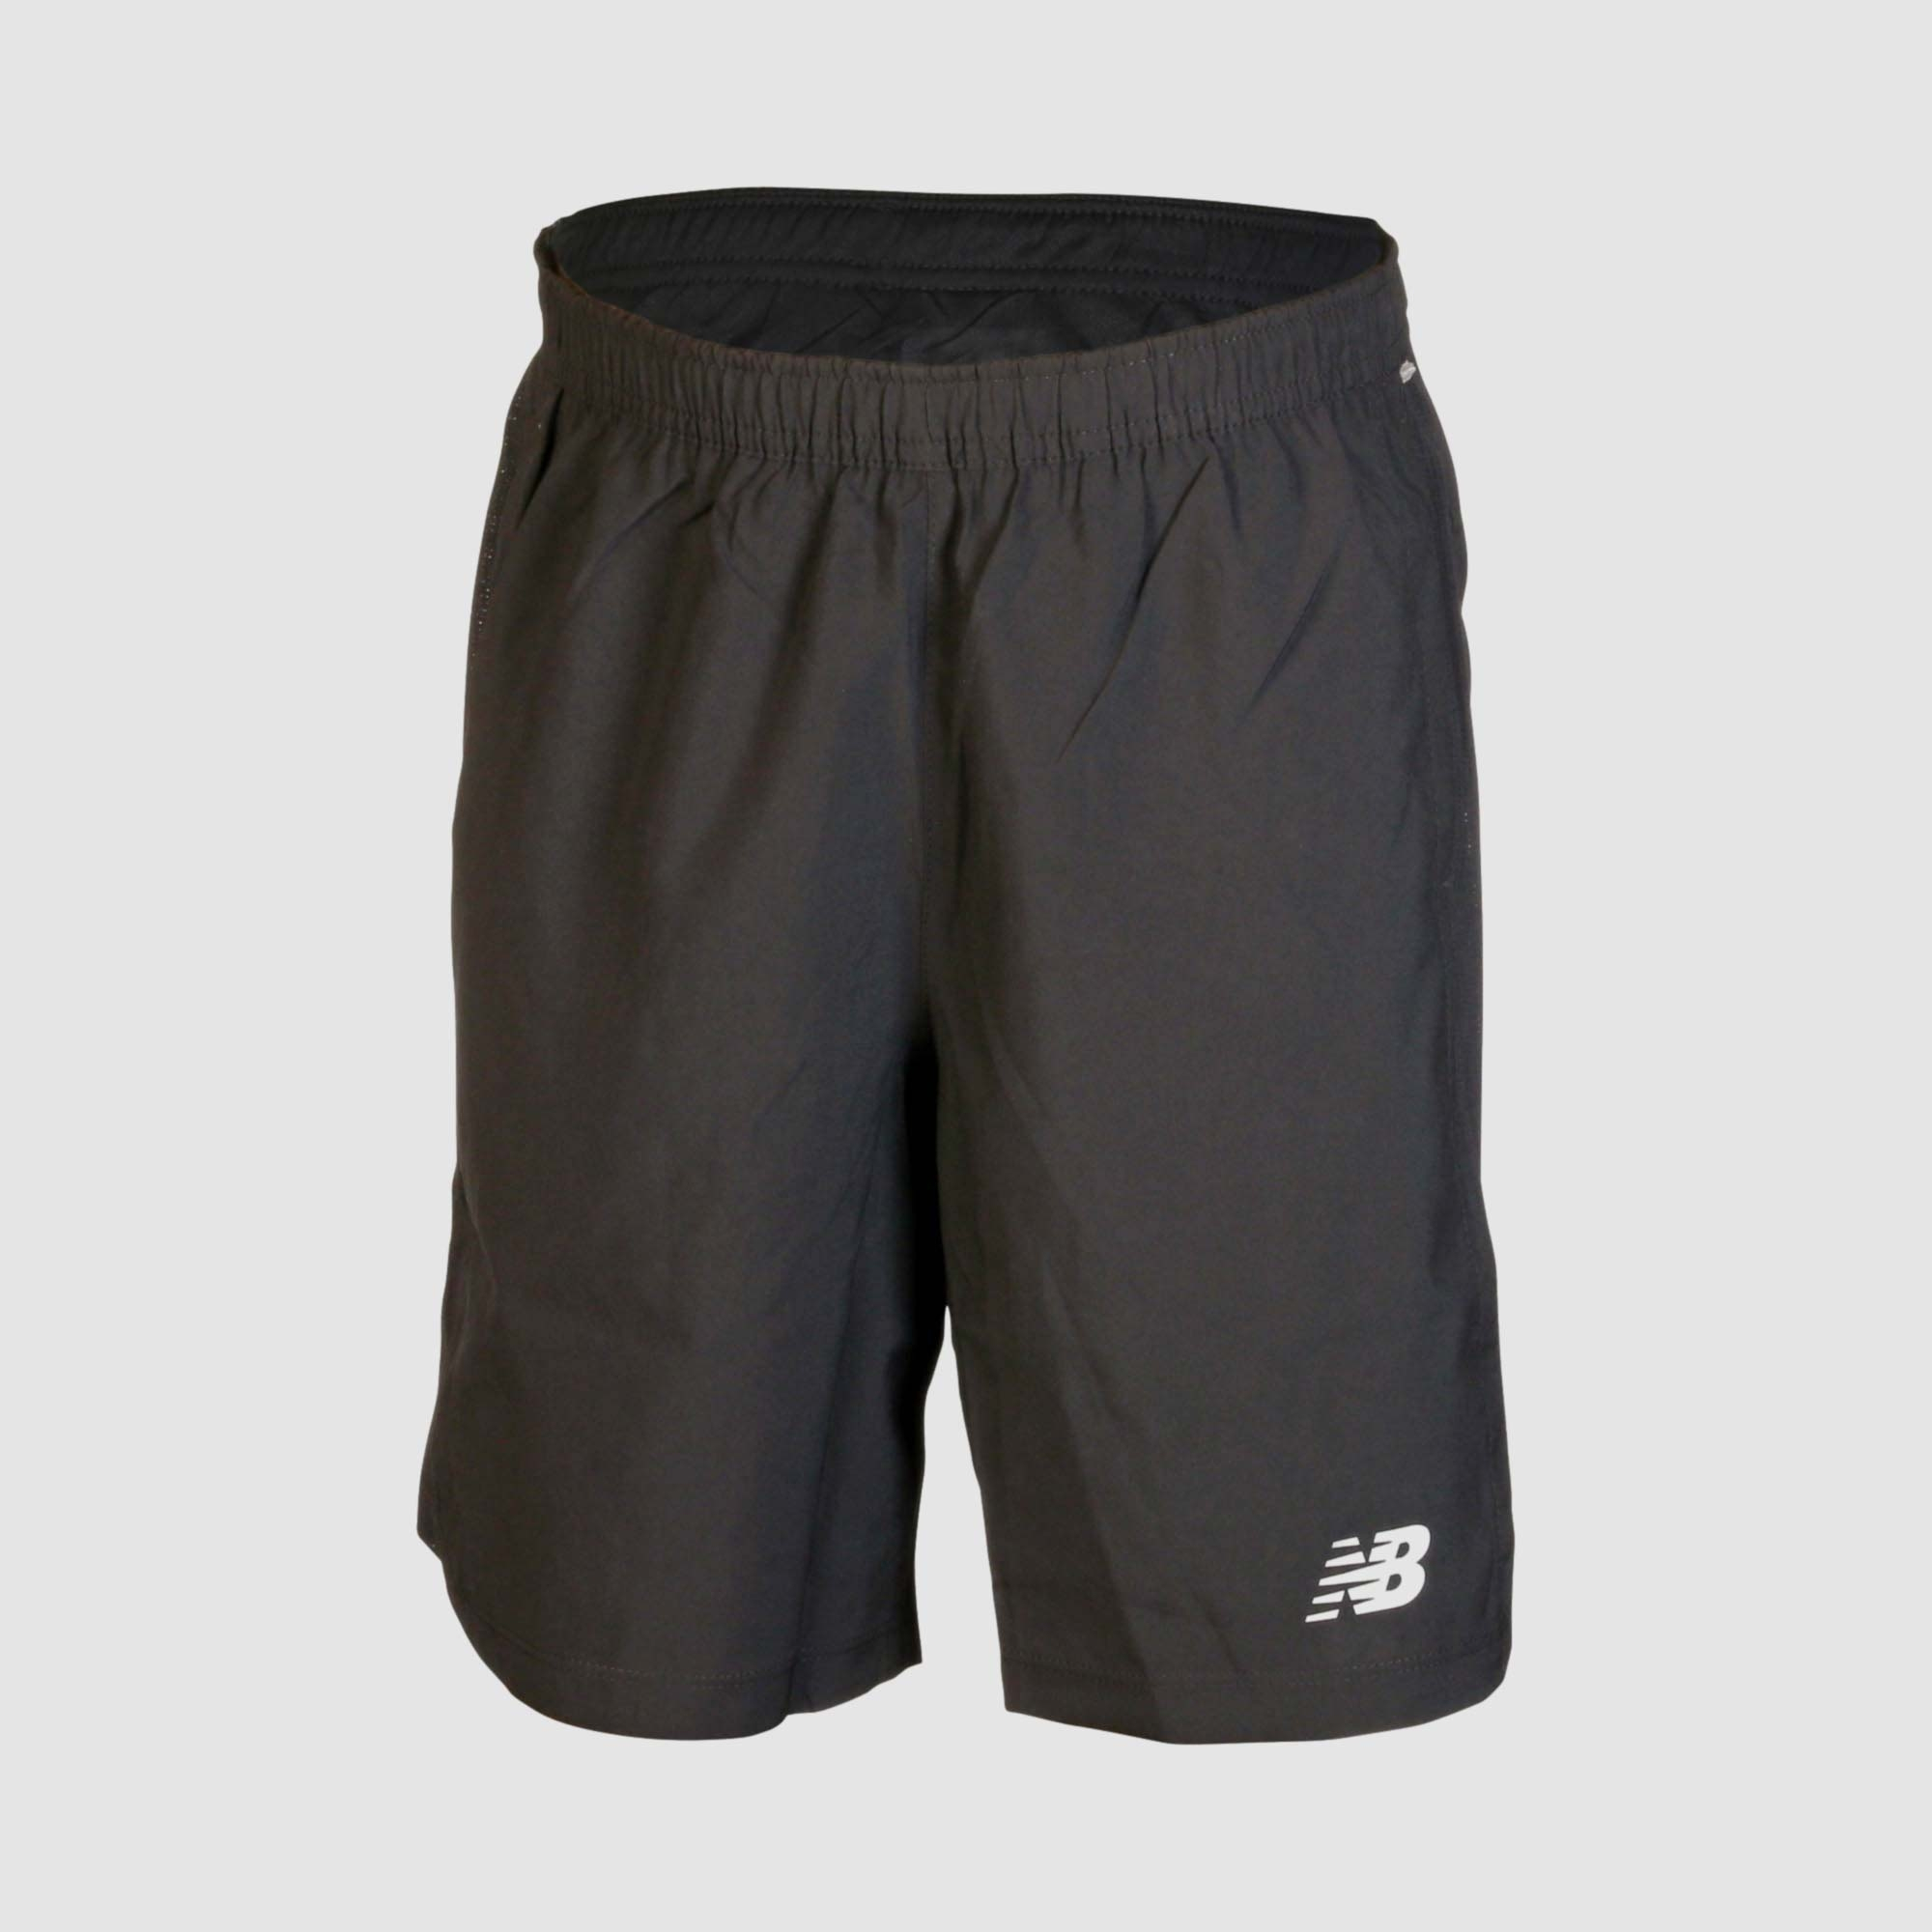 New Balance Boys 7In Accelerate Short